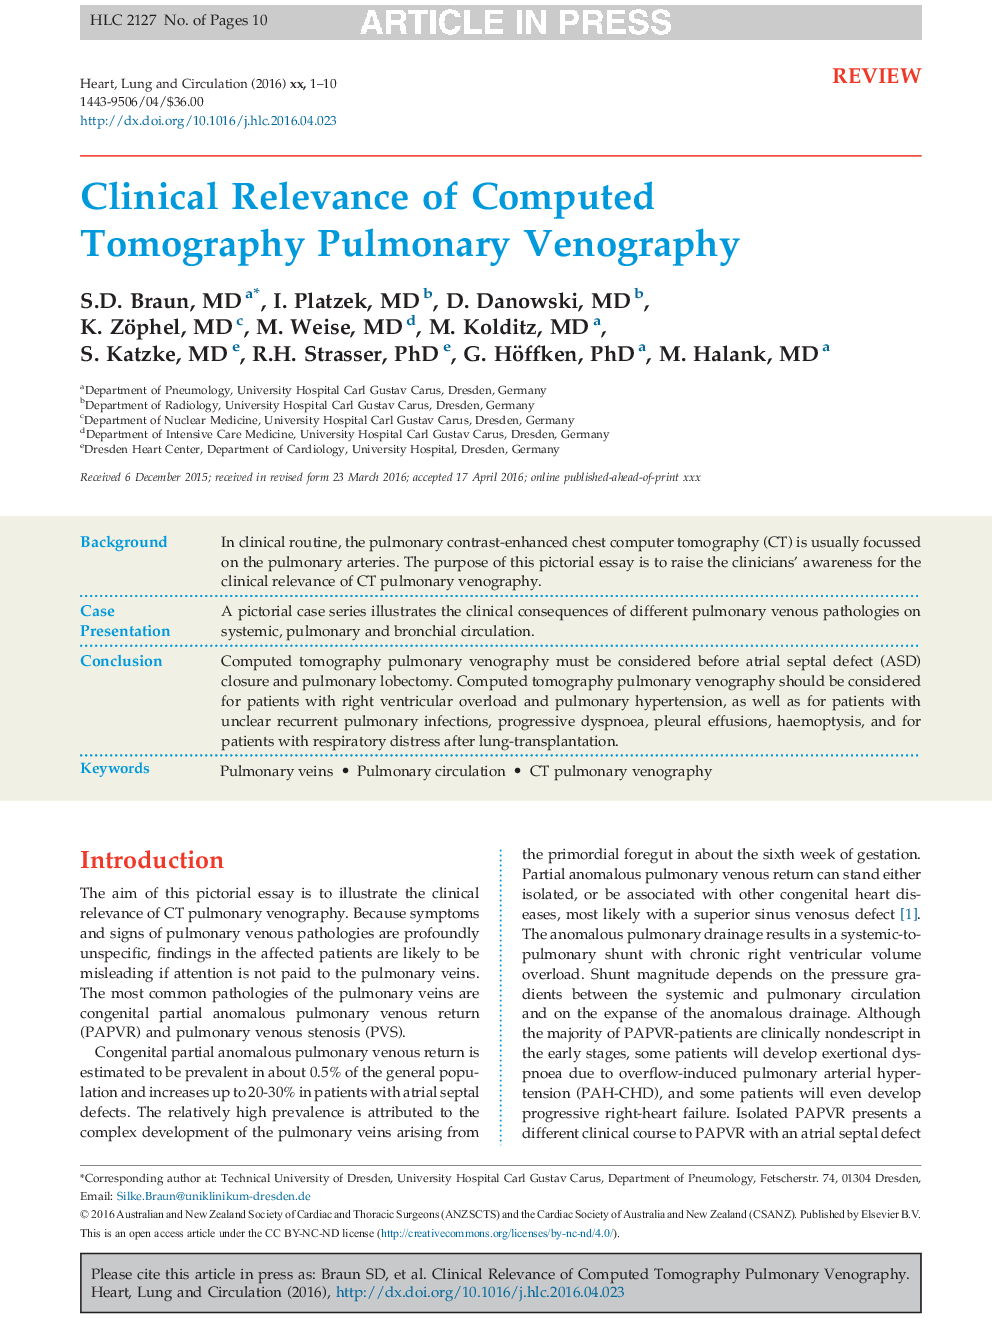 Clinical Relevance of Computed Tomography Pulmonary Venography